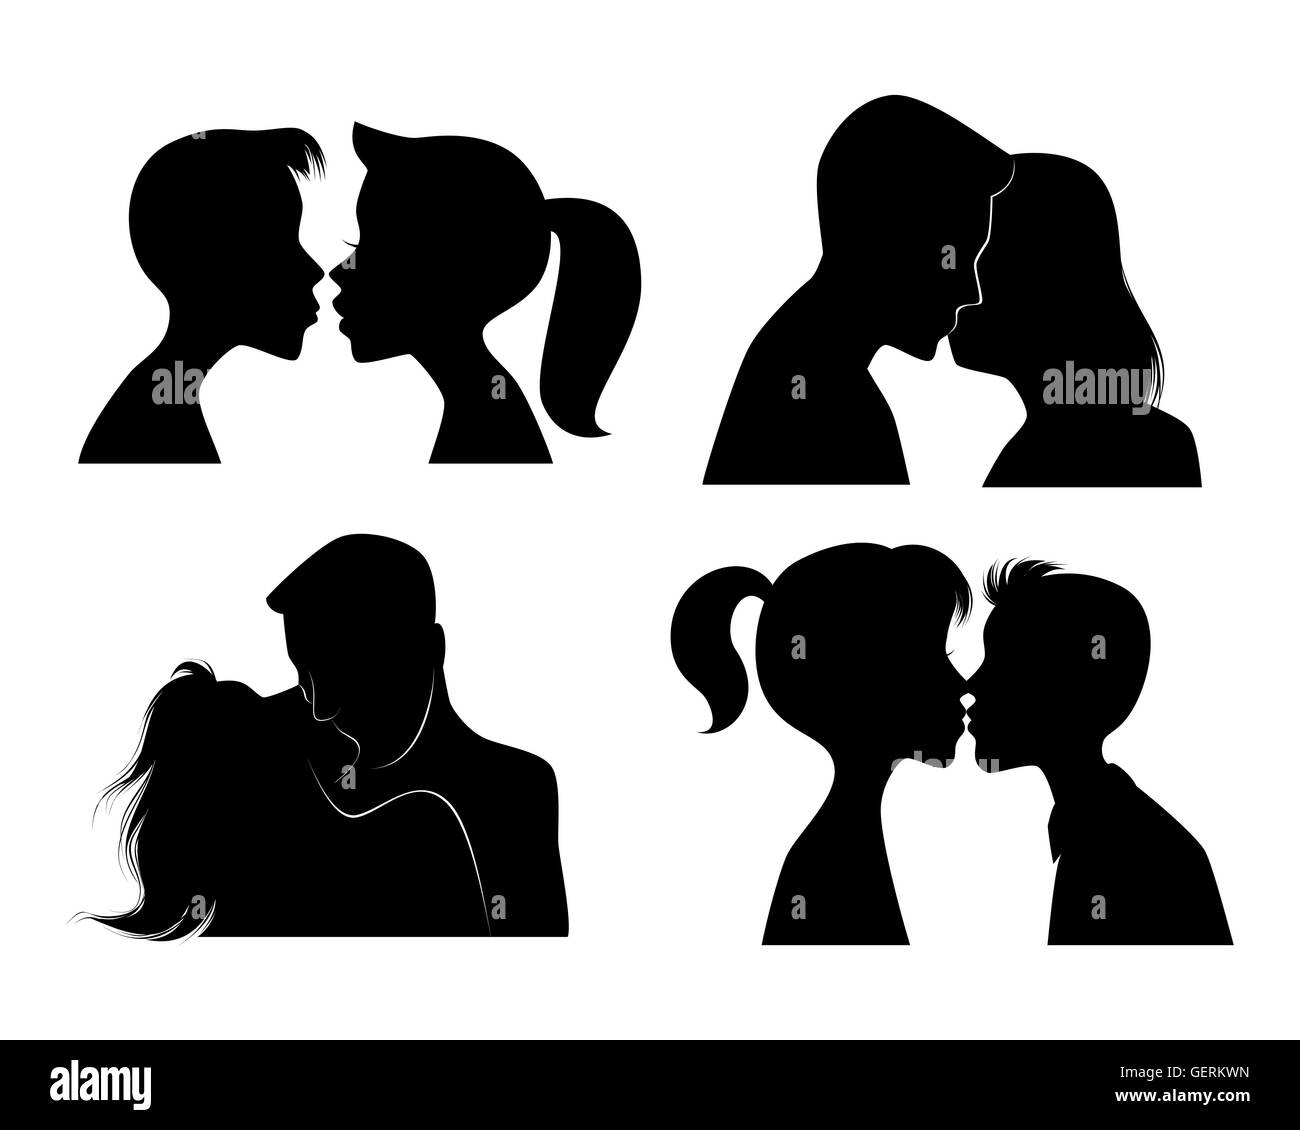 Vector illustration of a four kissing couples silhouettes Stock Vector